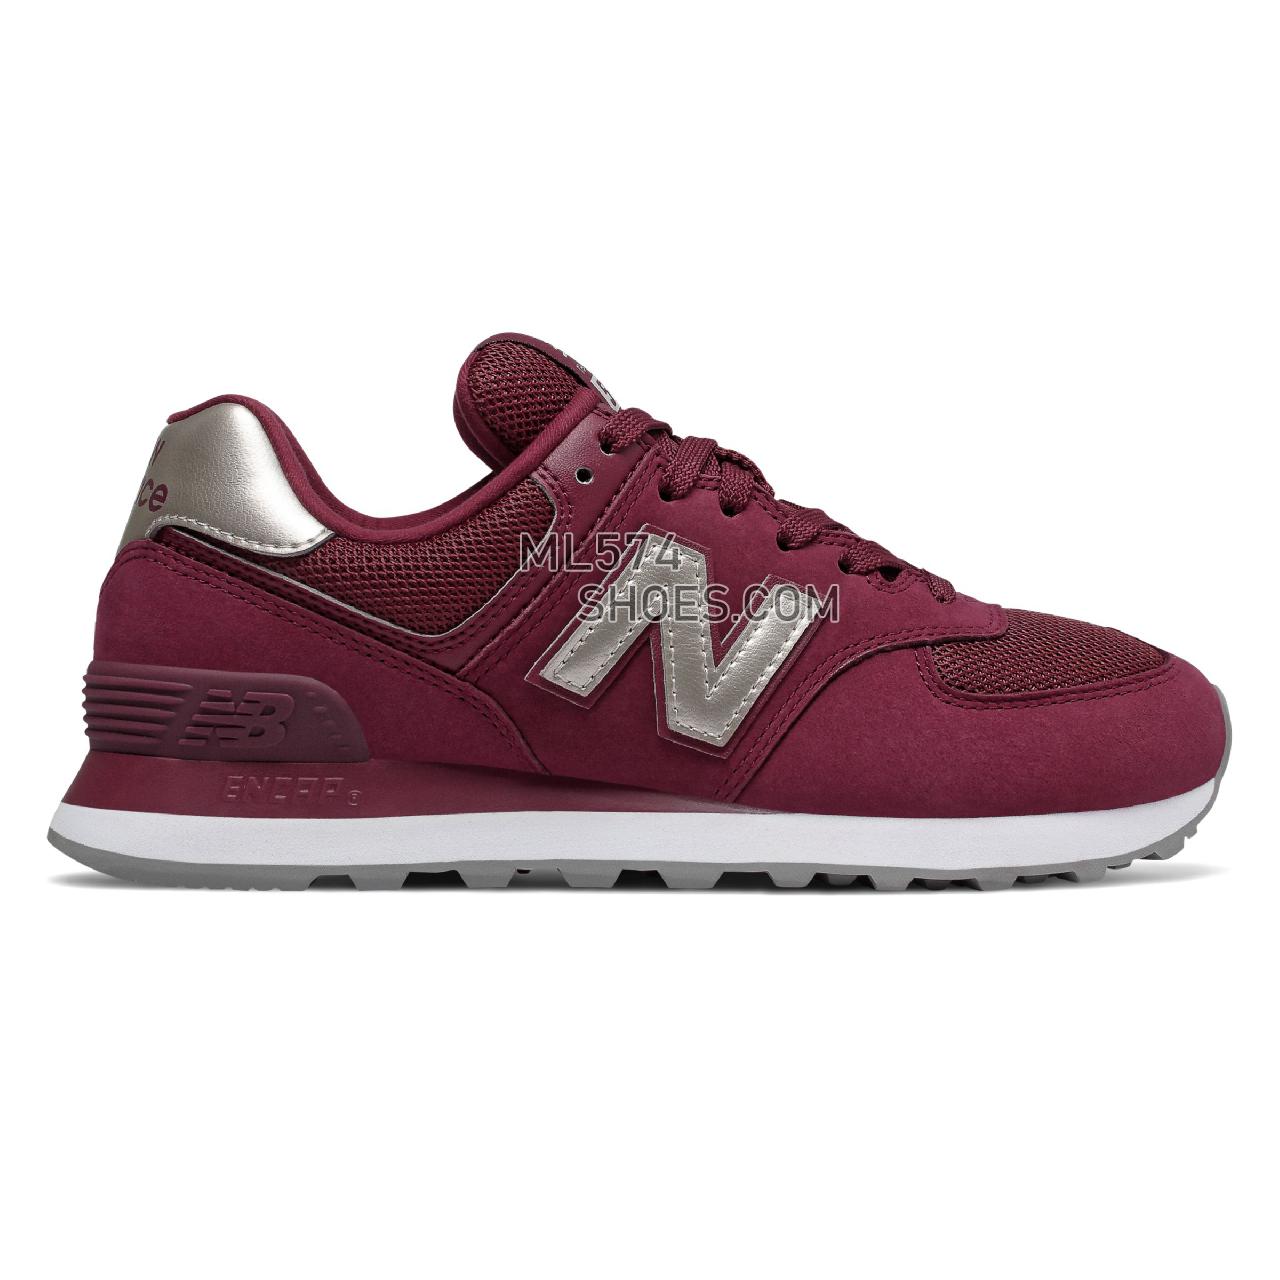 New Balance 574 - Women's Classic Sneakers - Sedona with Champagne - WL574WNL